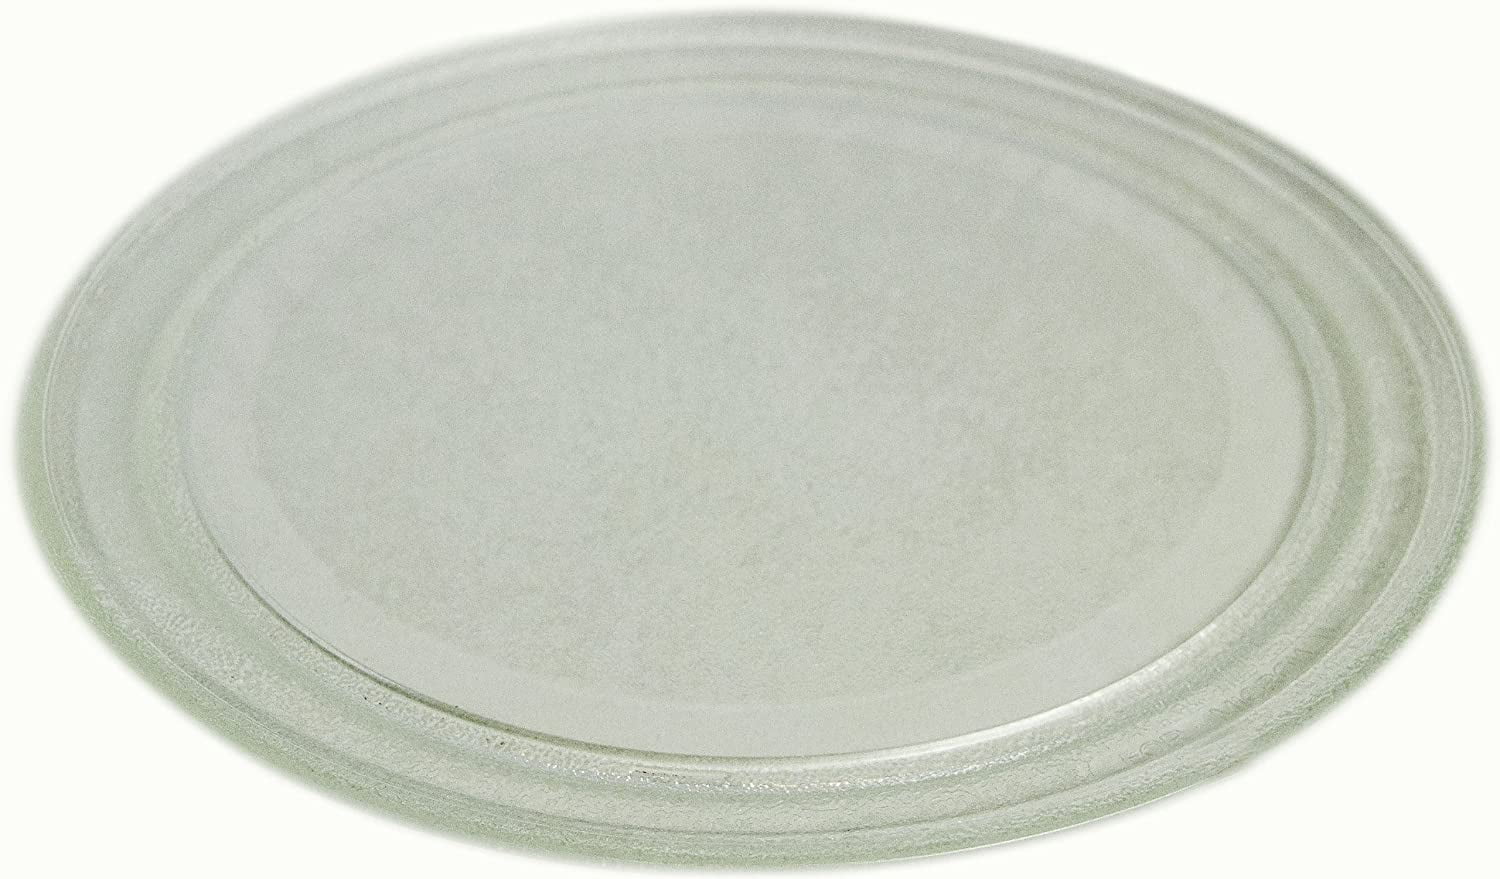 LG 3390W1A044B Microwave Glass Turntable Tray for sale online